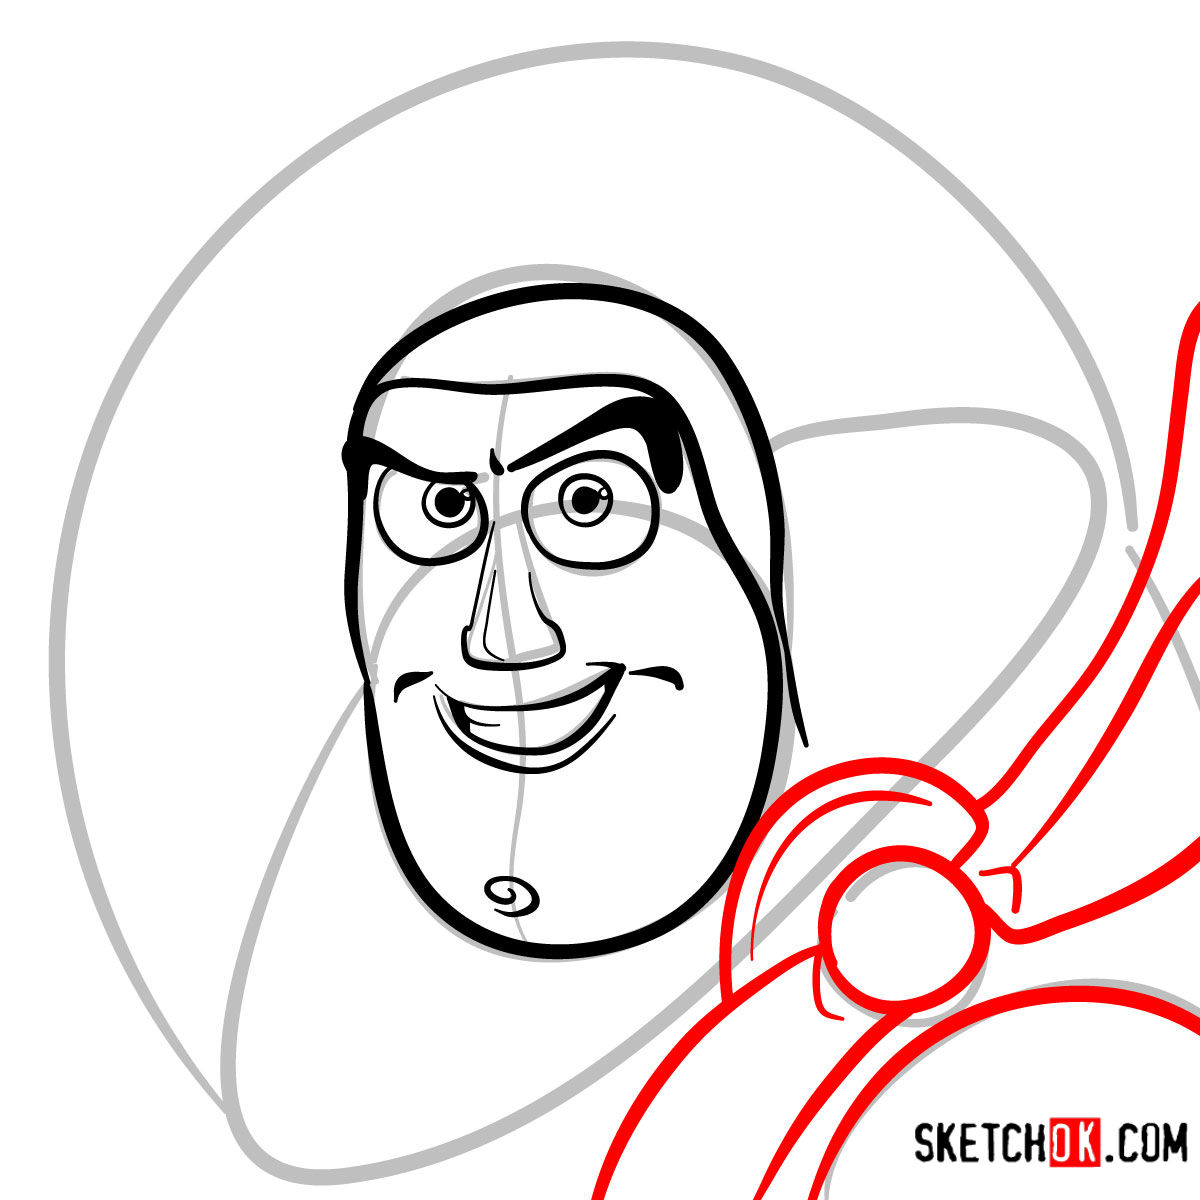 How to draw Buzz Lightyear's face | Toy Story - step 06